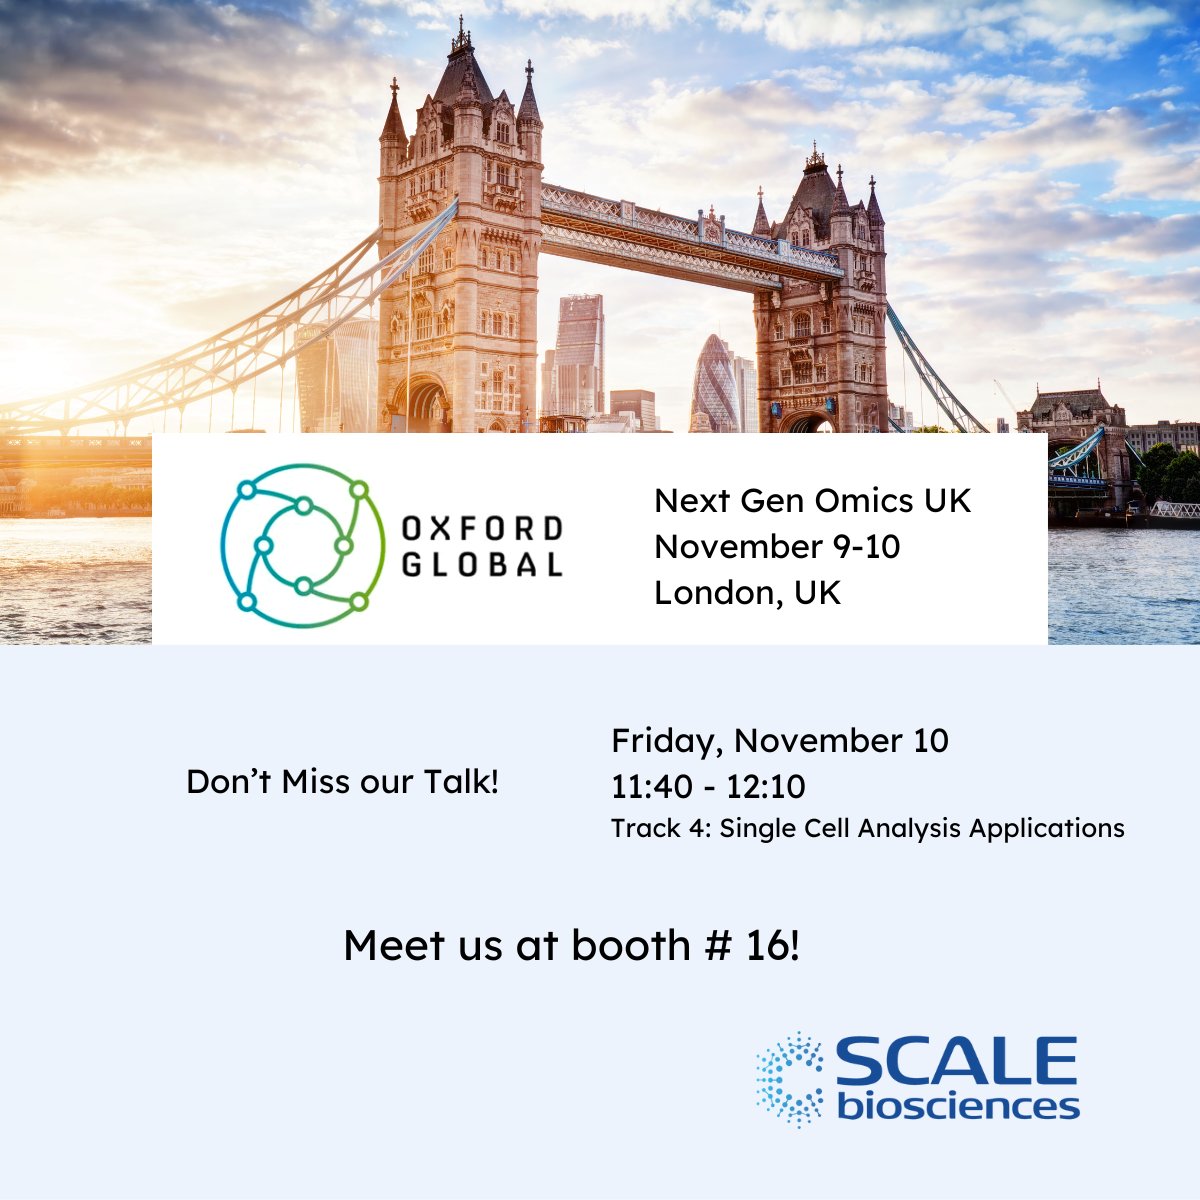 Our EU team will be in London next week for the Oxford Global Next Gen Omics UK event!  Don't miss our speaking session on Day 2 (November 10) in the Single Cell Applications Track, at 11:40, or come chat to us at booth #16.  #OmicsSeries23 #singlecell